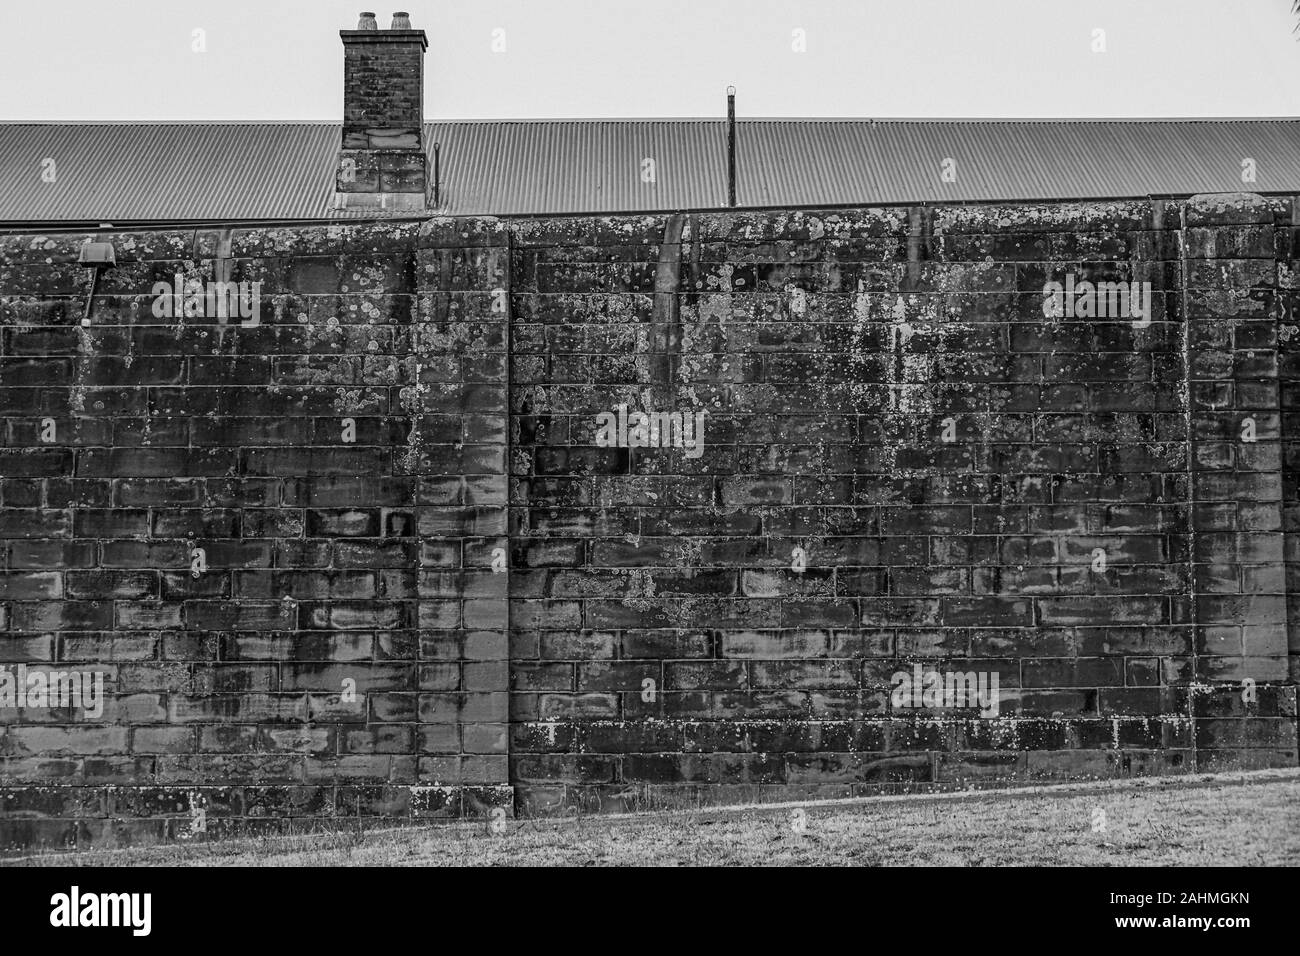 Weathered Sandstone Perimeter Wall of the Former East Maitland Gaol (Jail, Prision, Correctional Centre) with Building and Chimney in Background Stock Photo